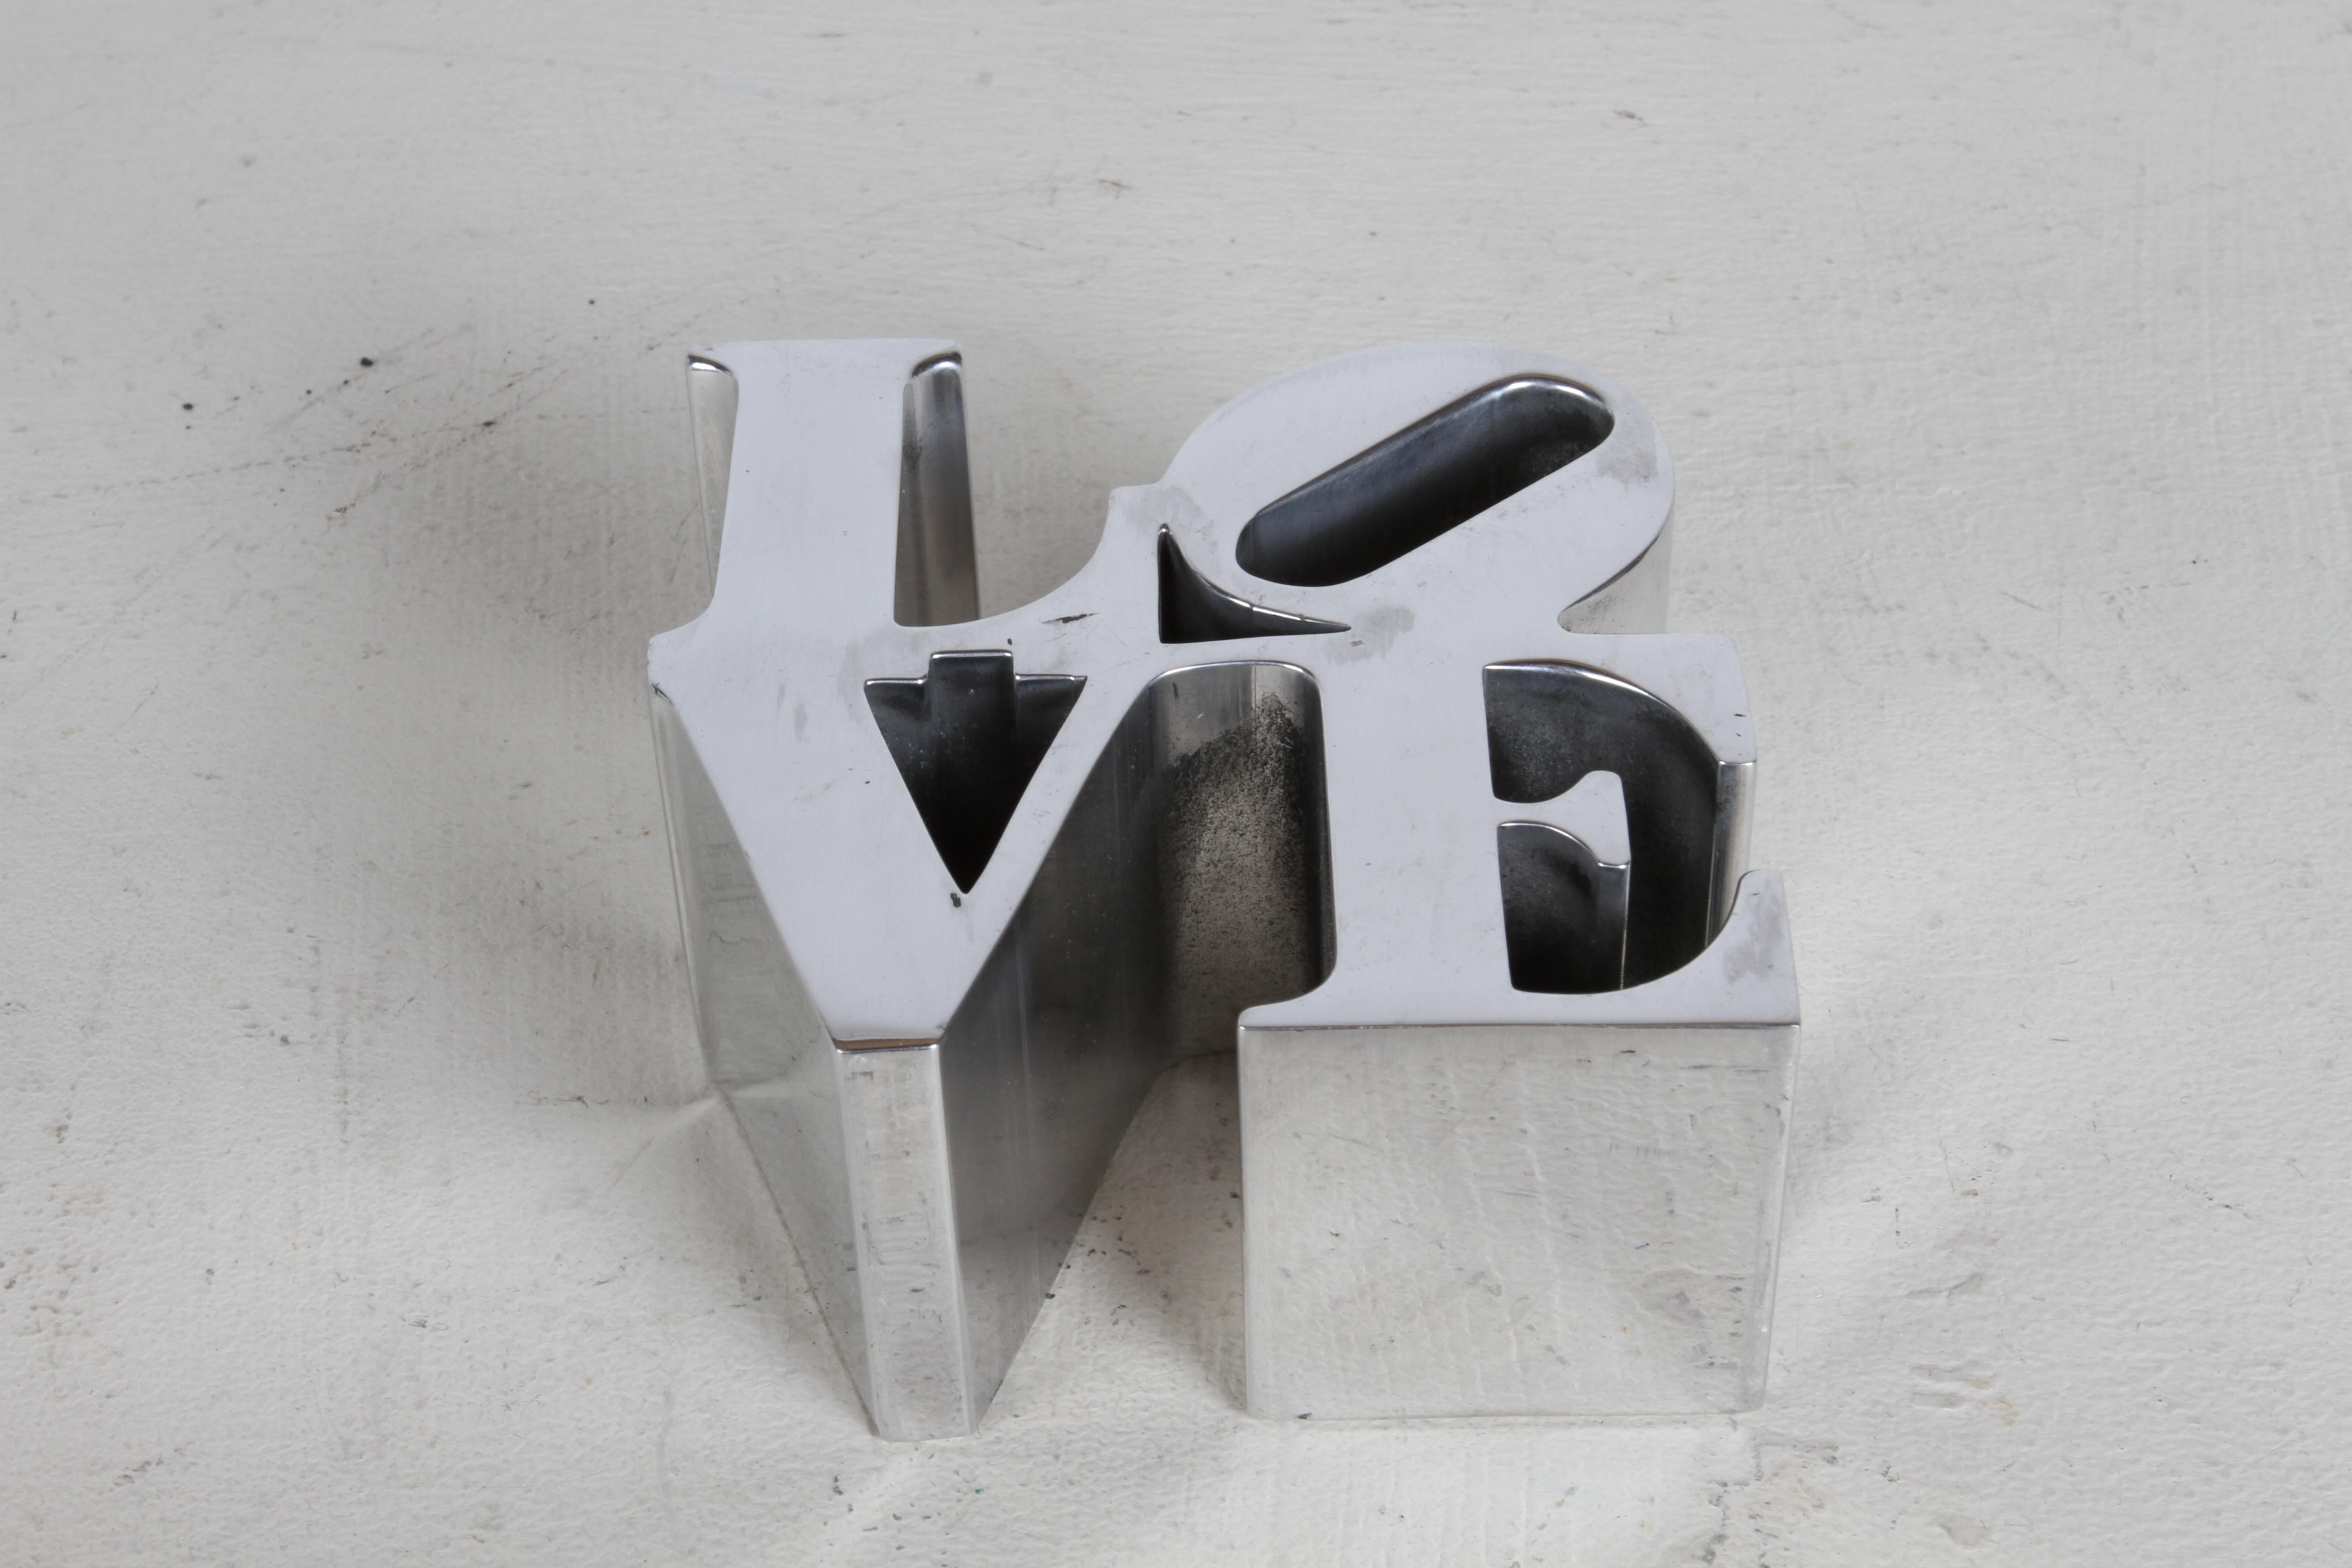  Vintage 70s POP ART Robert Indiana LOVE Sculpture Paperweight or Desk Accessory For Sale 4